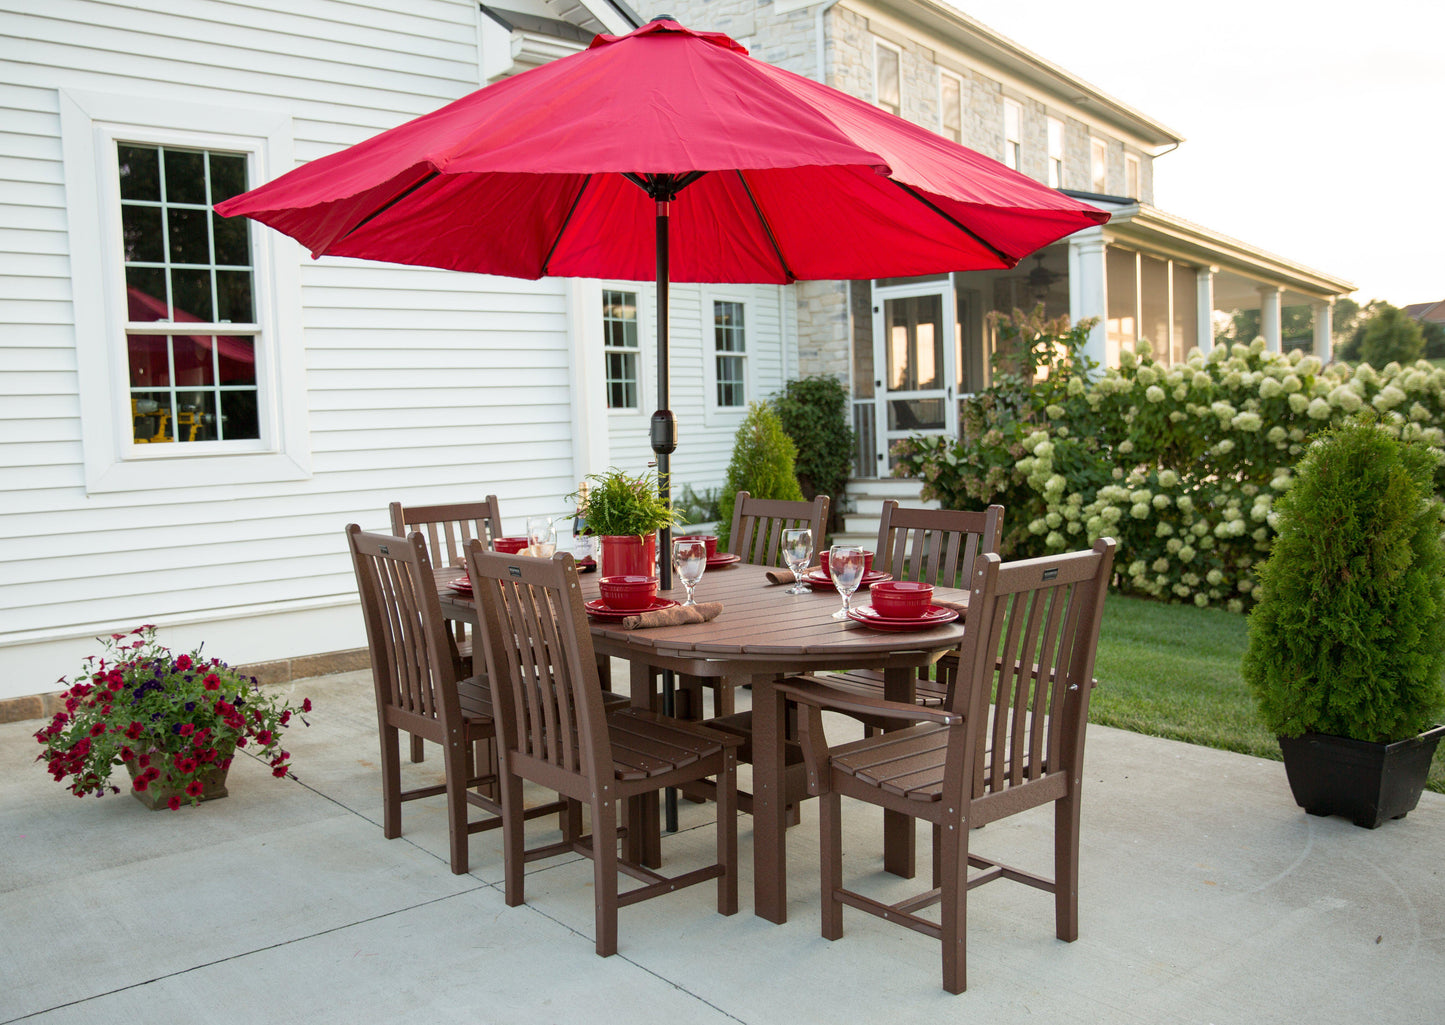 Wildridge Classic Outdoor Recycled Plastic 7 Piece Oval Patio Dining Set - LEAD TIME TO SHIP 6 WEEKS OR LESS